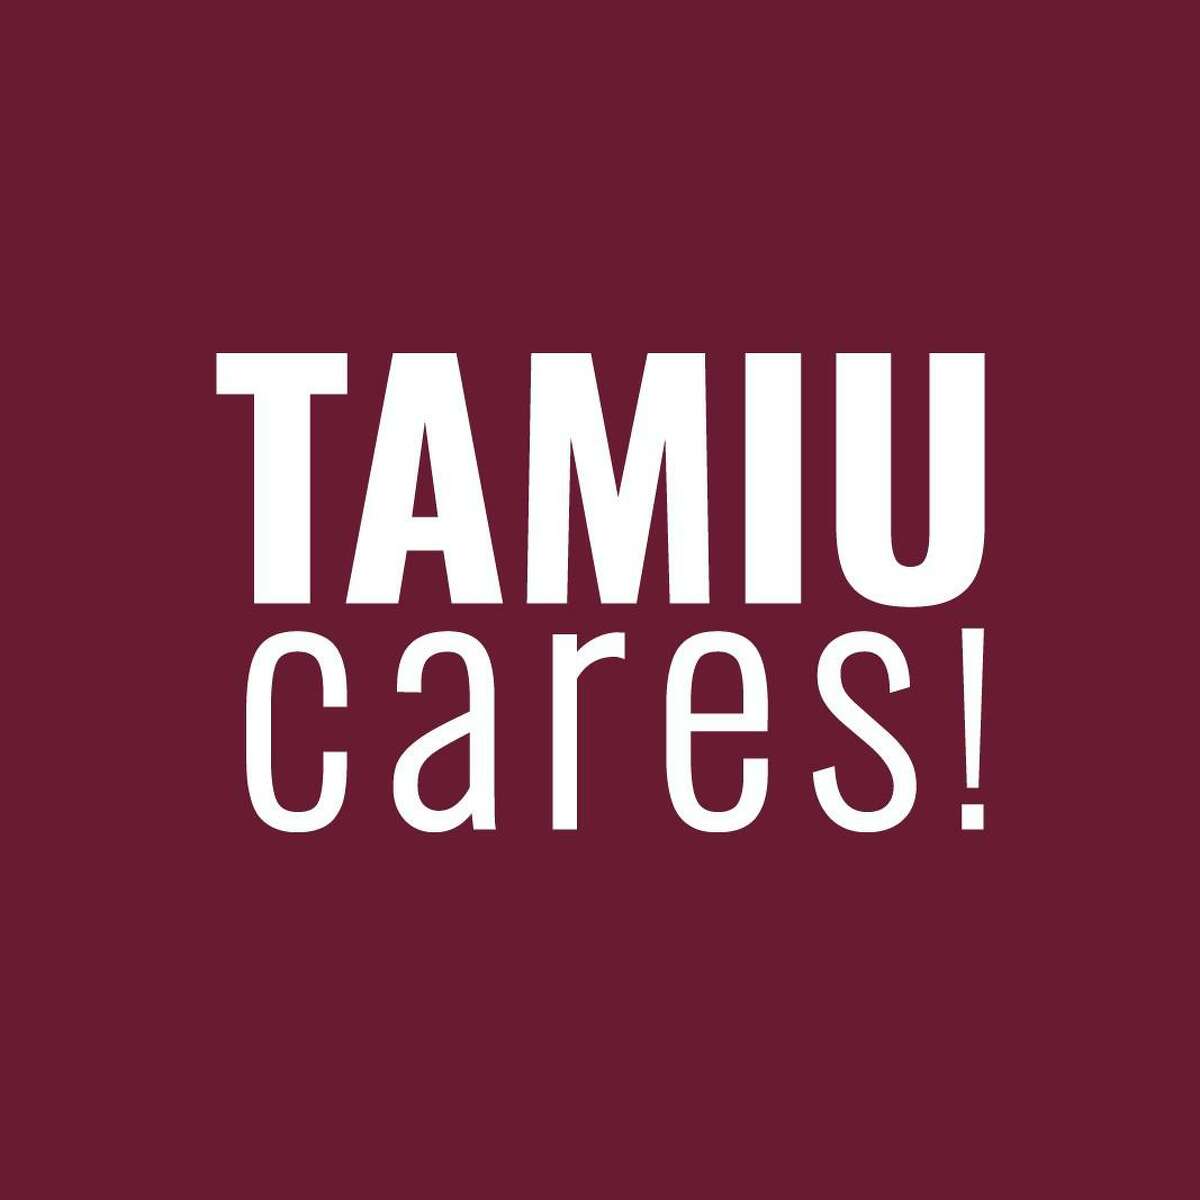 This Spring 2022, eligible students will be able to benefit from over $7.5 million in student support funding through TAMIU CARES.